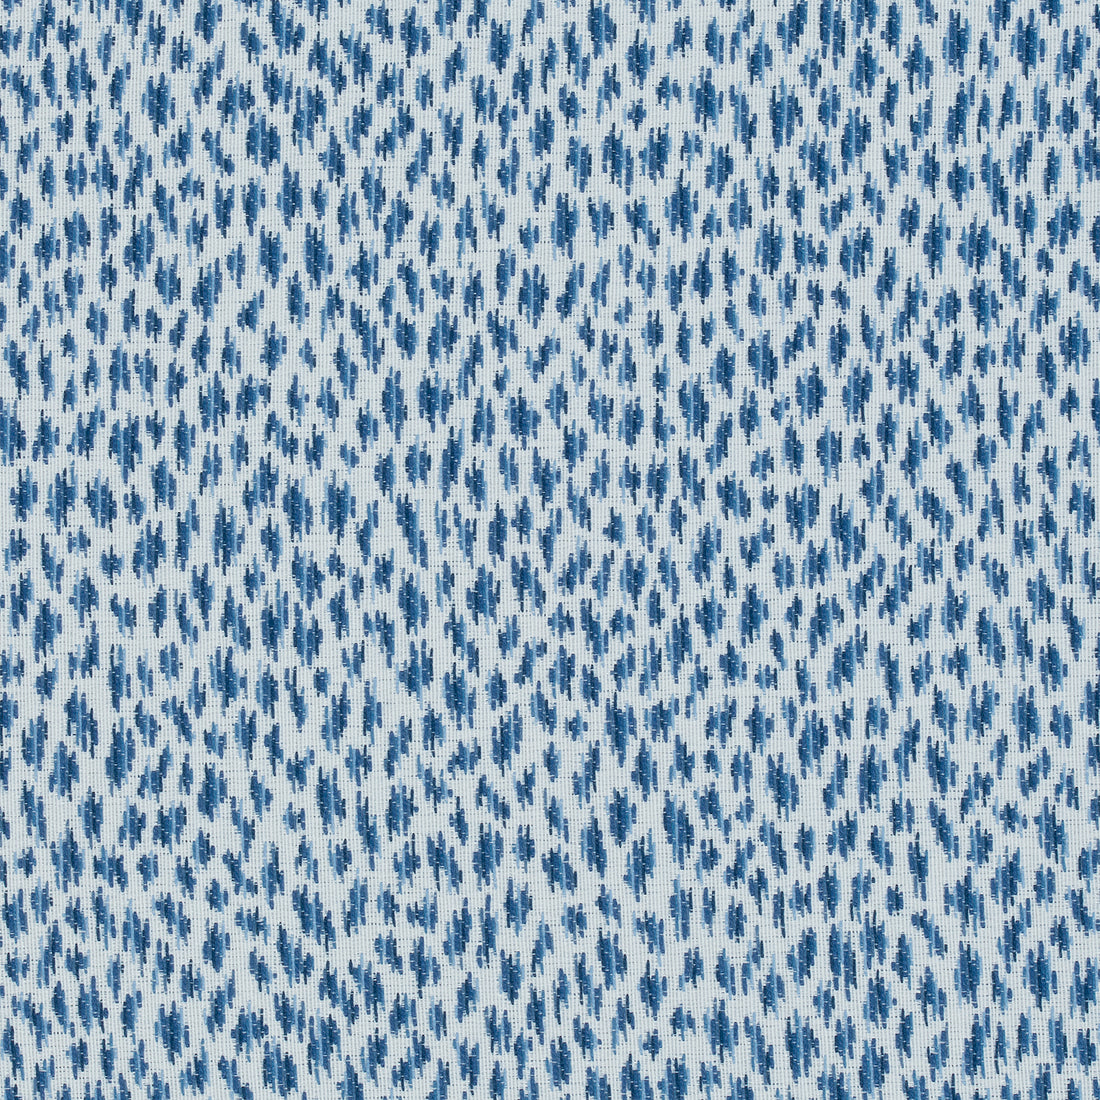 Citra fabric in blue color - pattern number W80455 - by Thibaut in the Woven Resource Vol 10 Menagerie collection